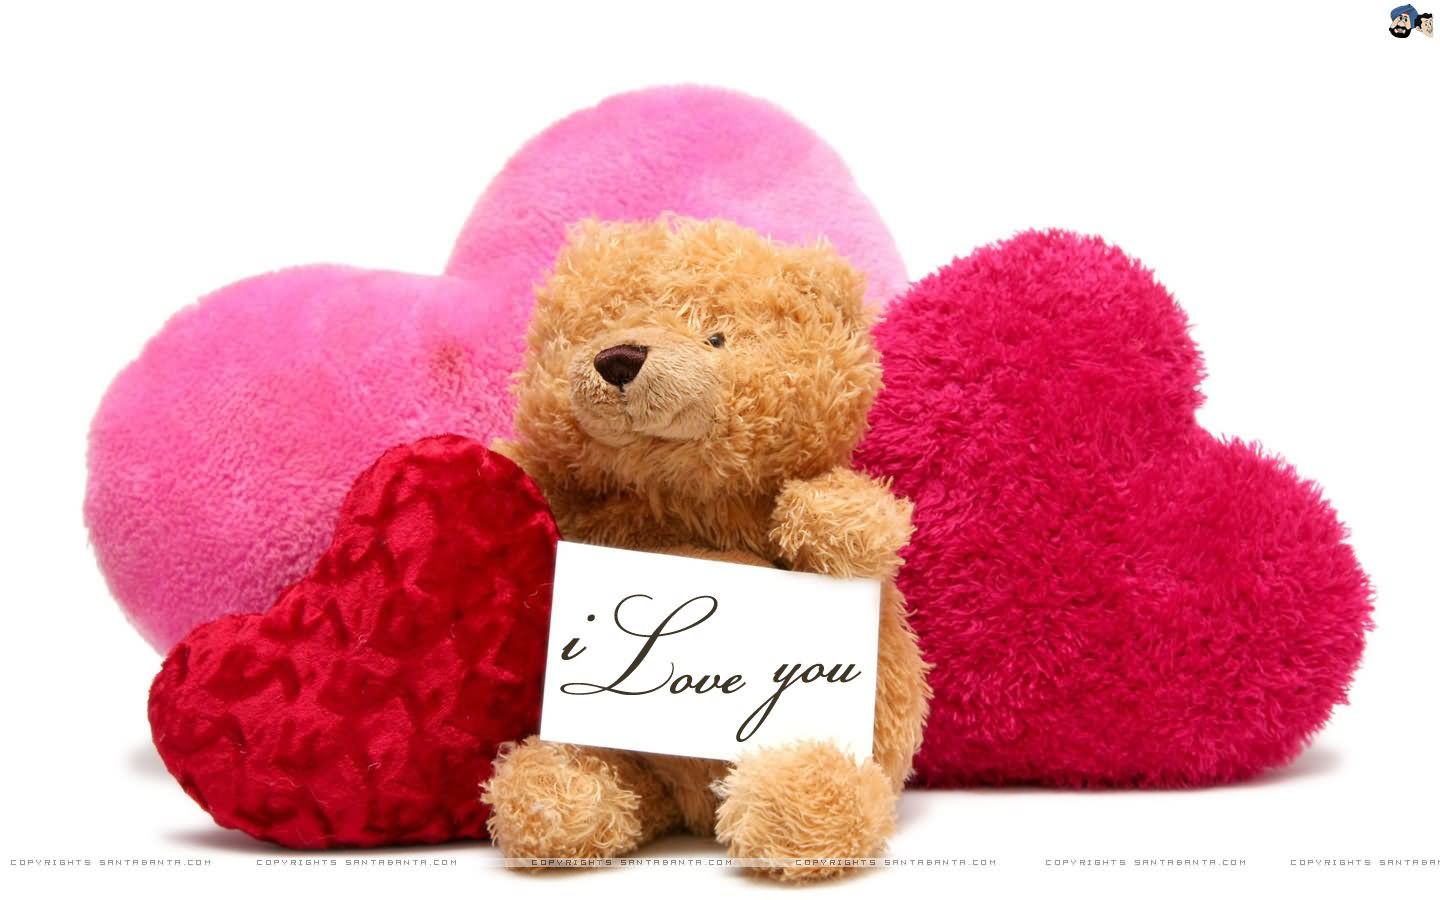 Happy Teddy Bear Day Messages, Sms .wallpapertip.com